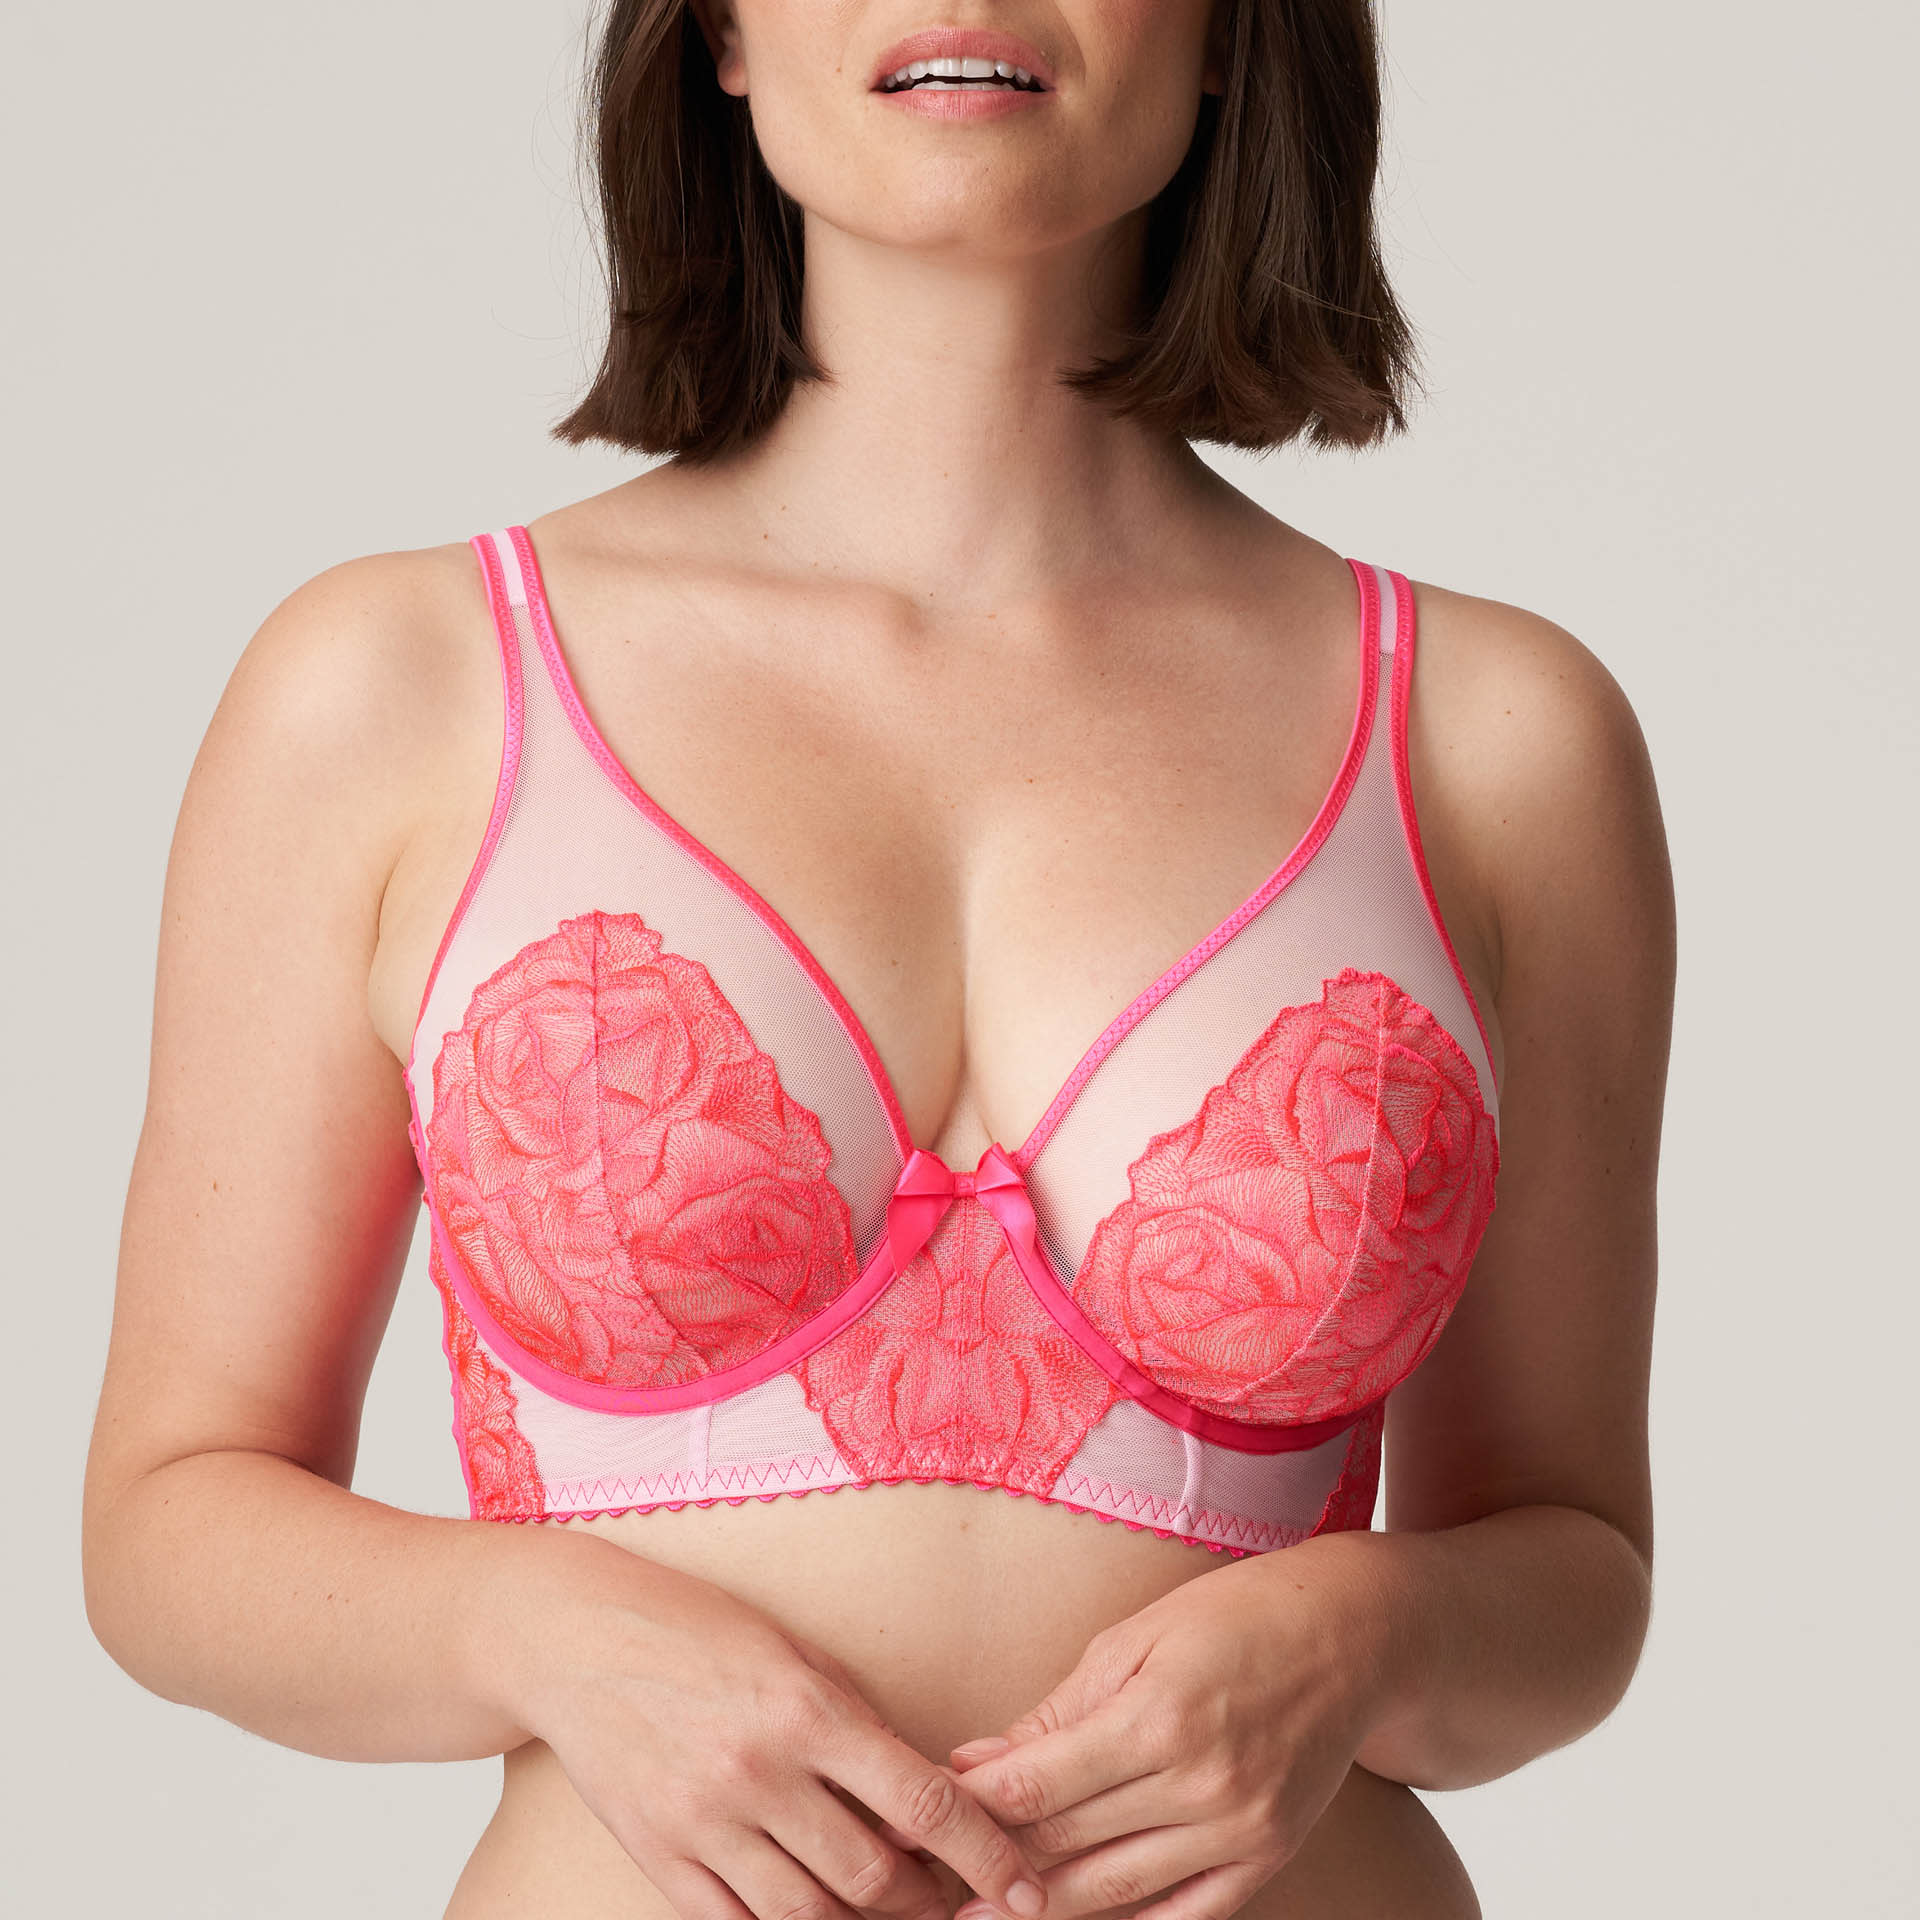 BRAS ON SALE 34E, Bras for Large Breasts